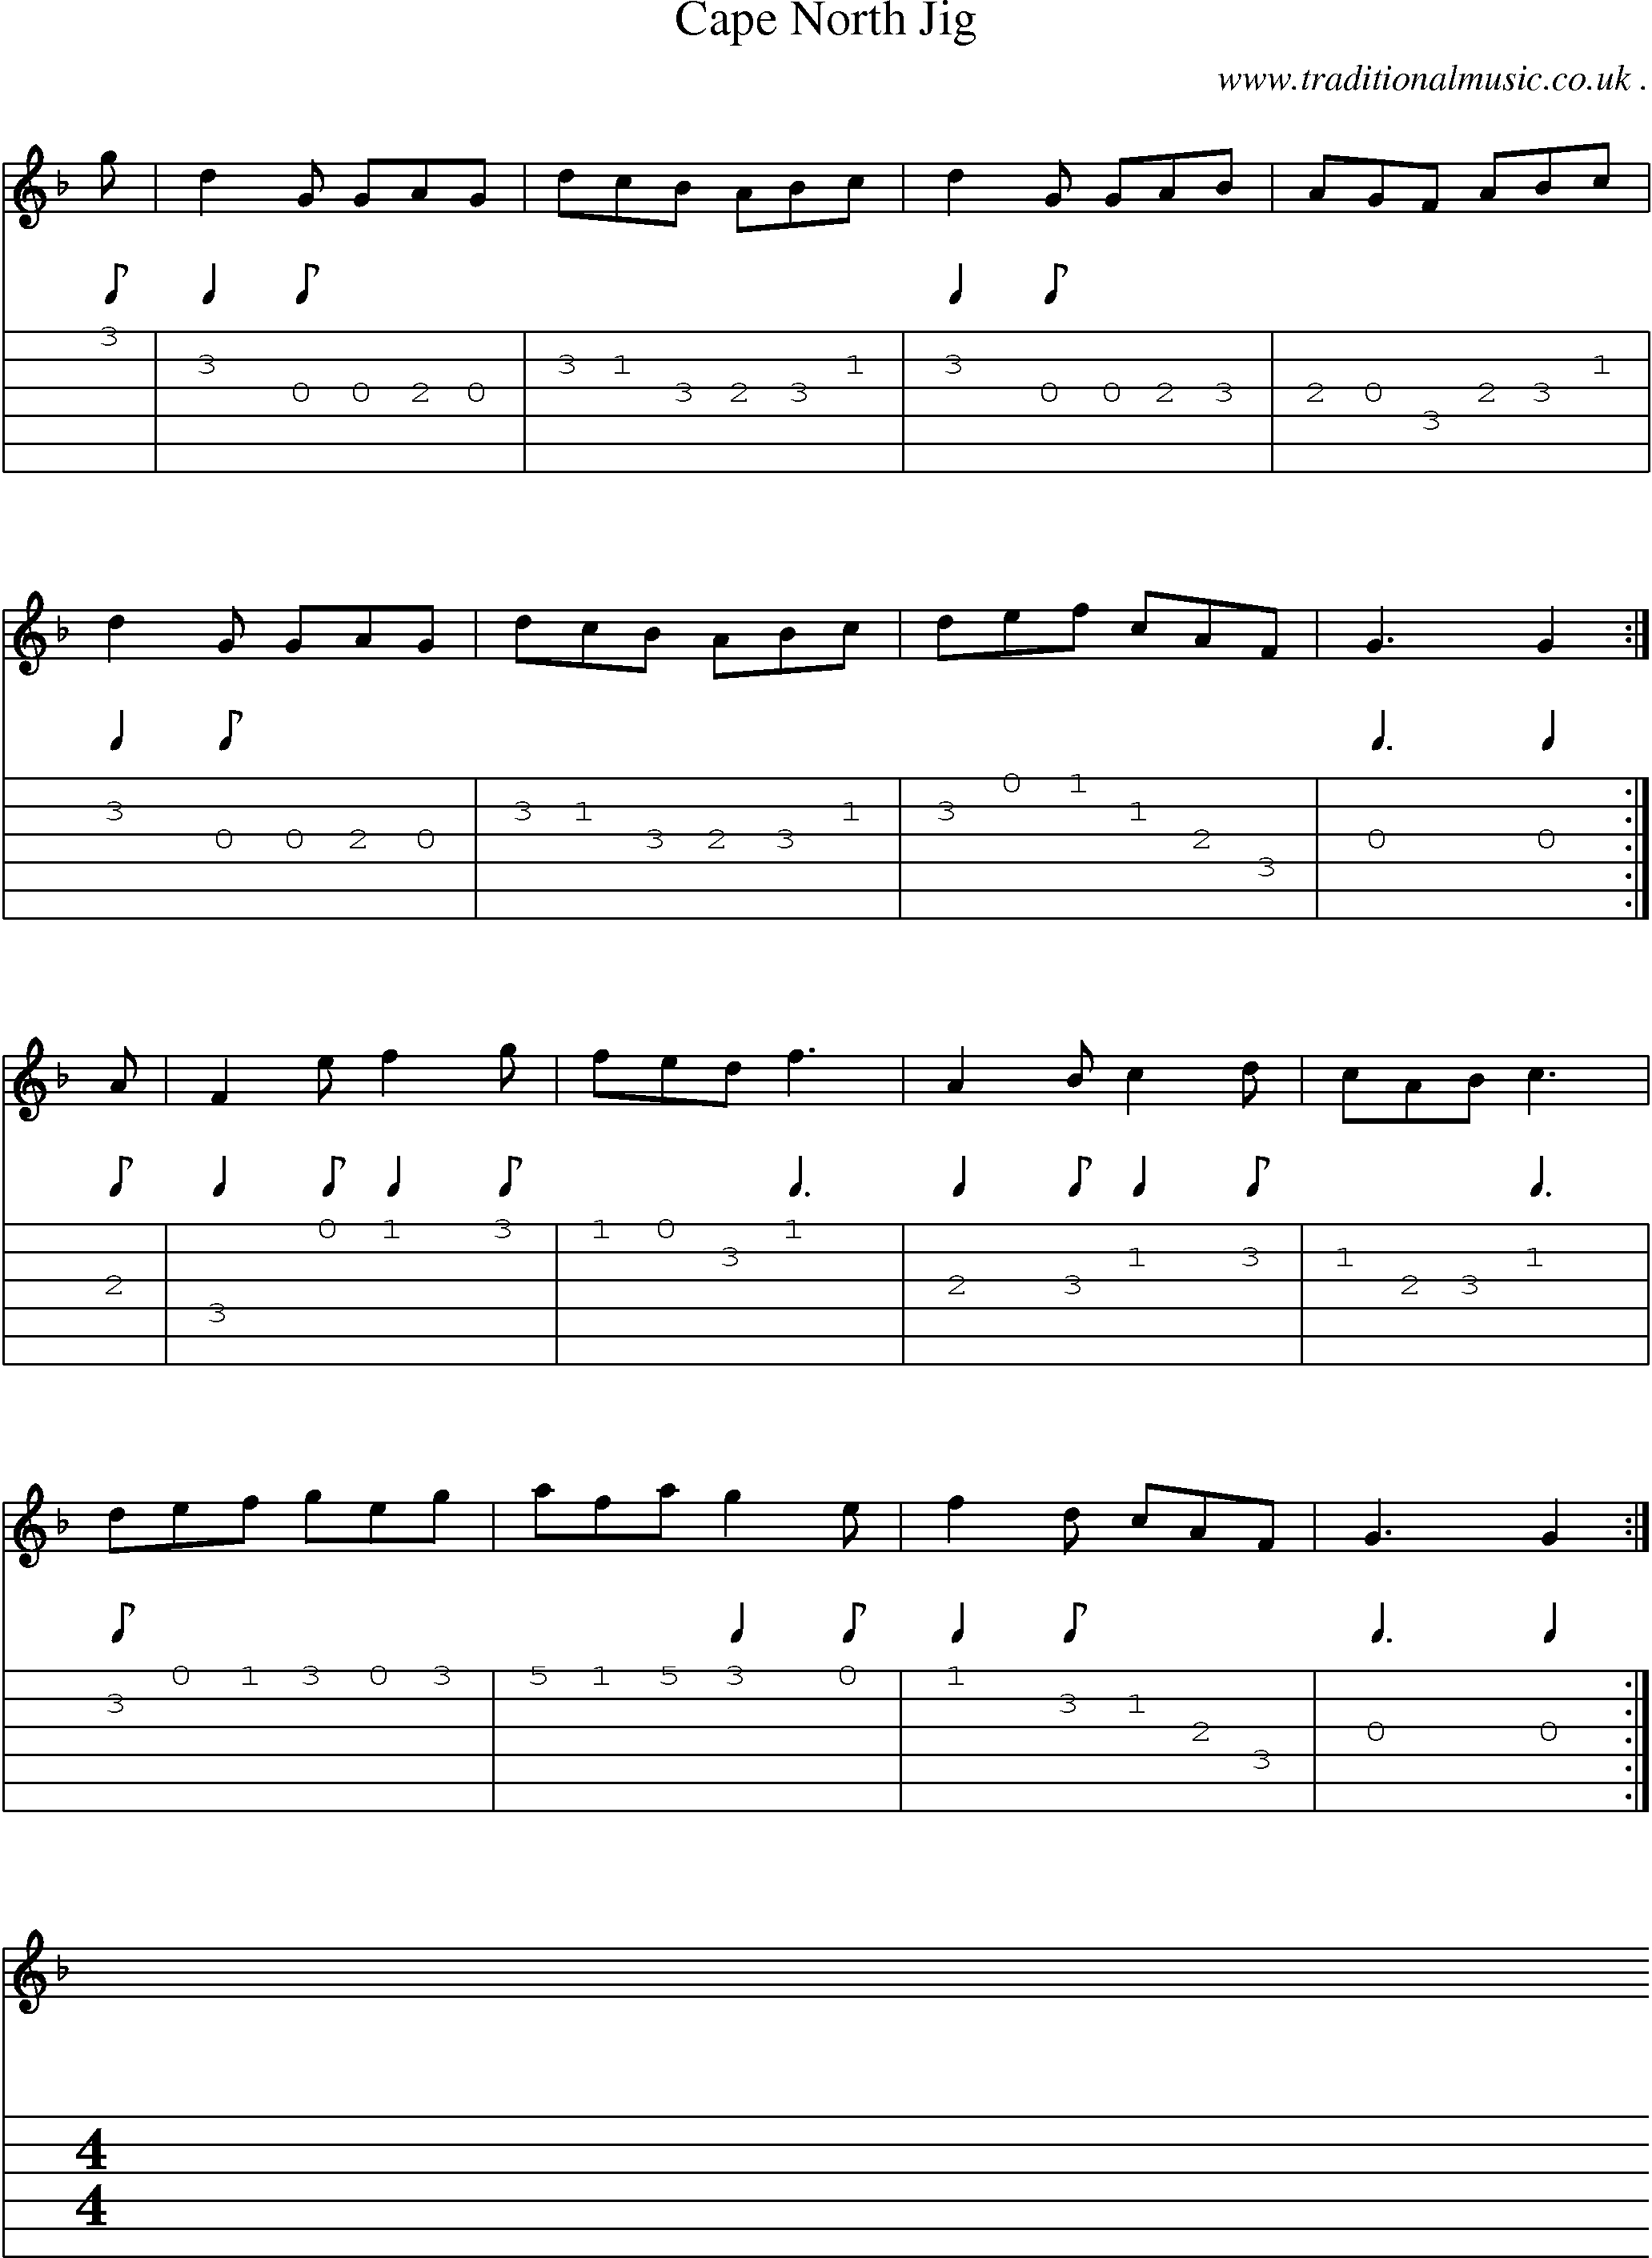 Sheet-Music and Guitar Tabs for Cape North Jig